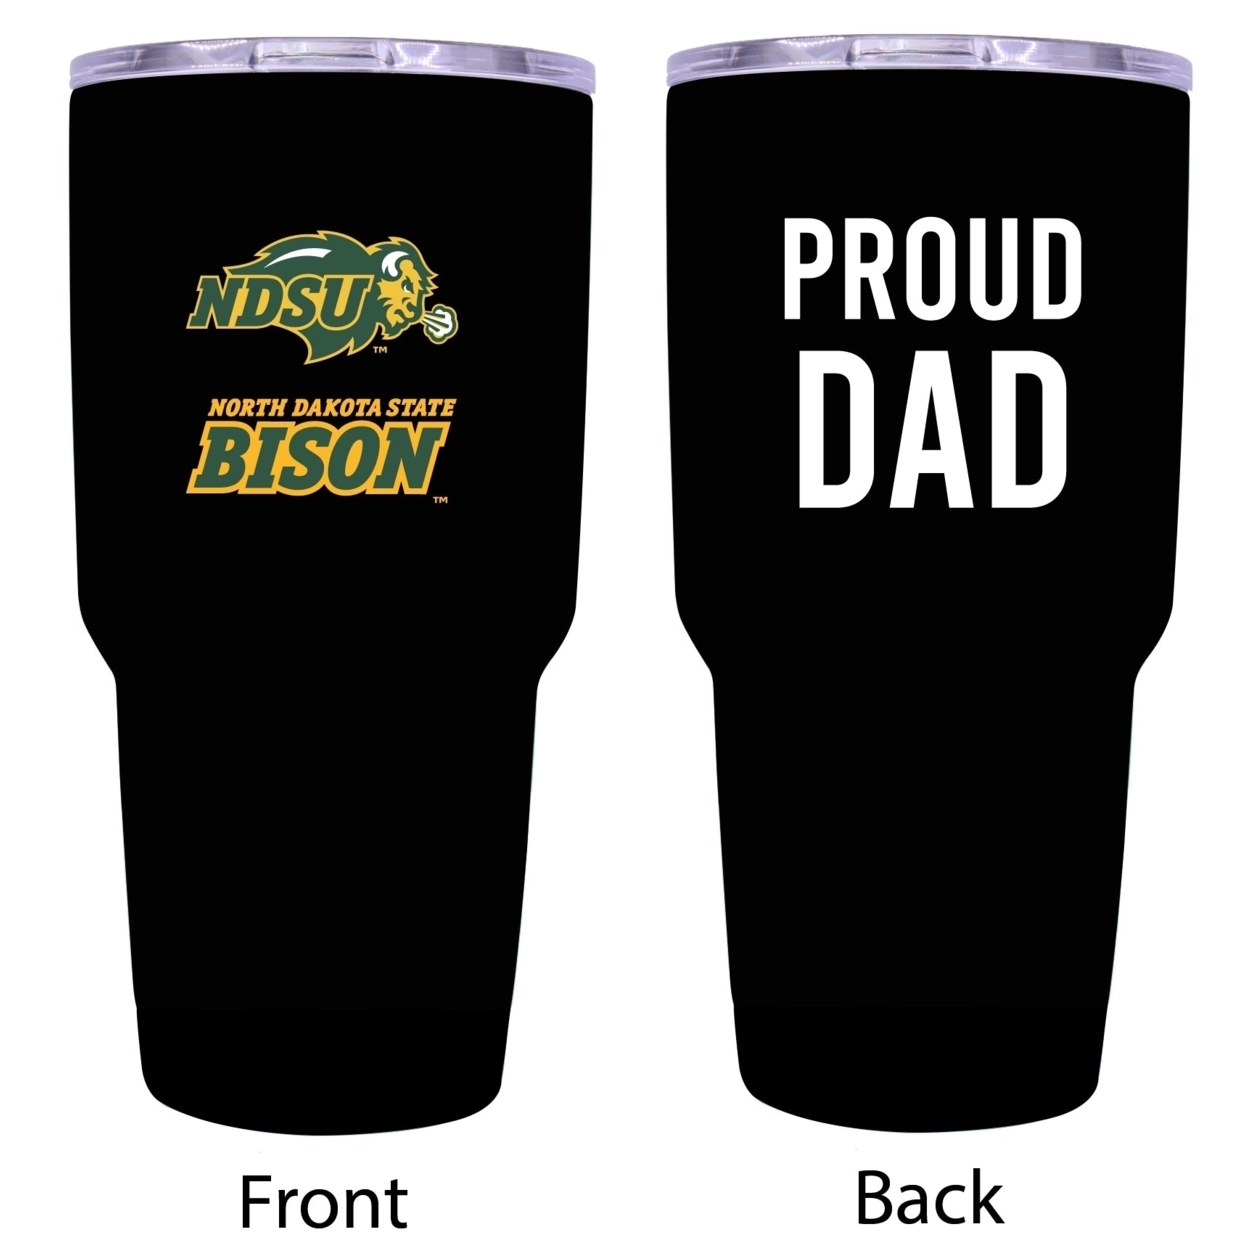 R And R Imports North Dakota State Bison Proud Dad 24 Oz Insulated Stainless Steel Tumblers Black.